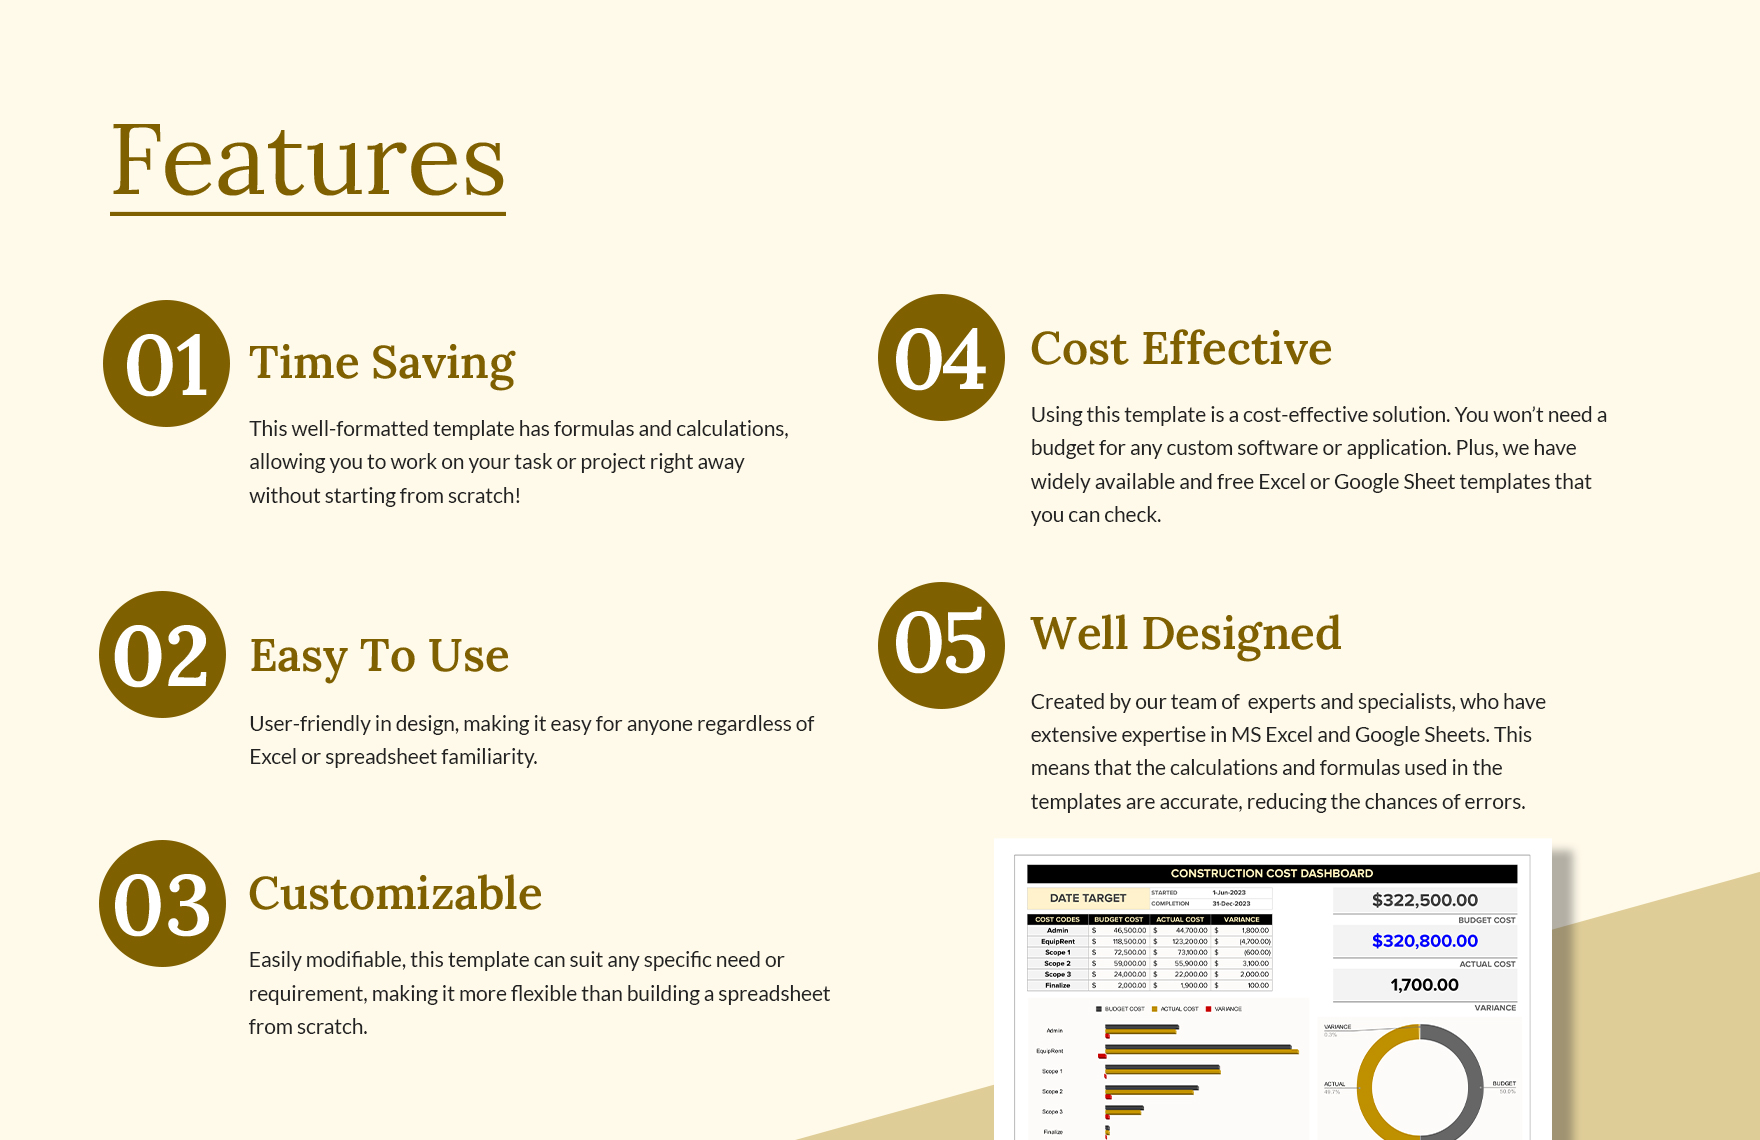 Construction Cost Template